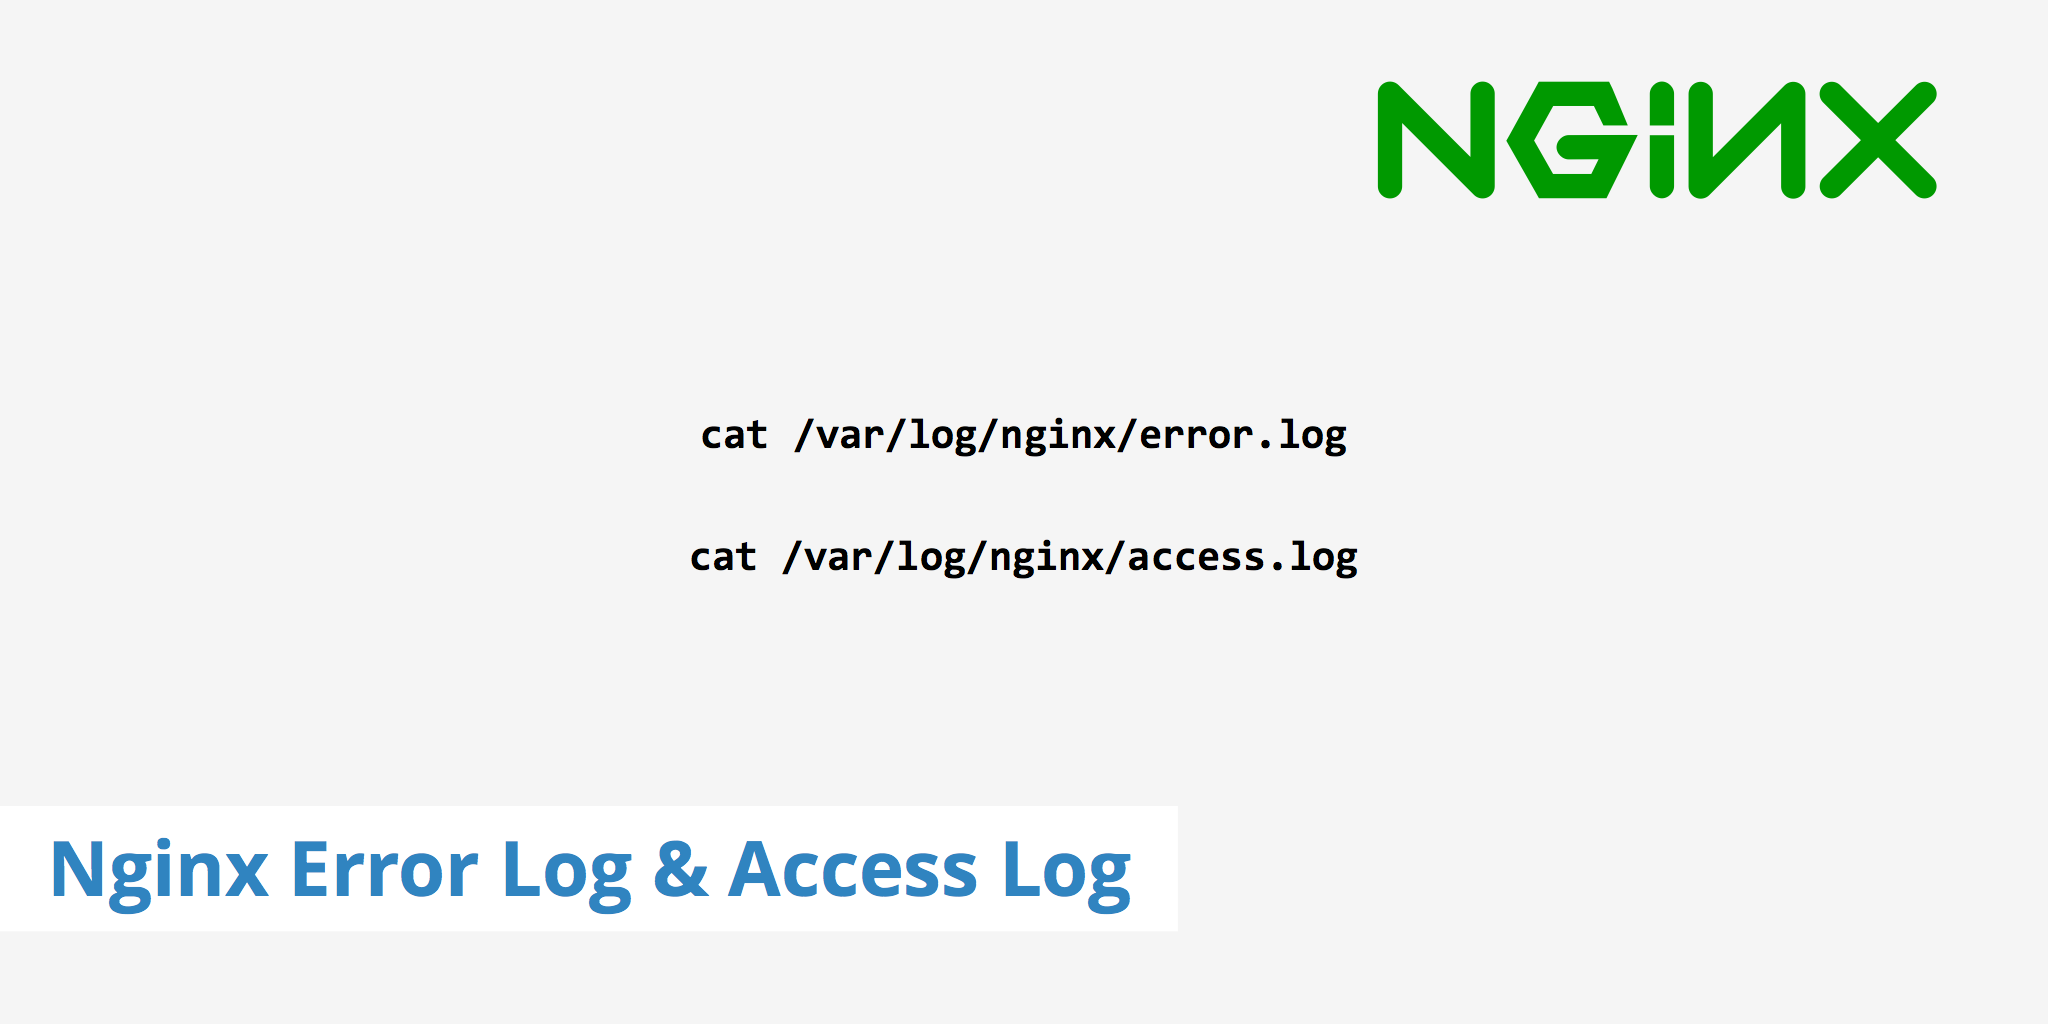 Configuring the Nginx Error Log and Access Log